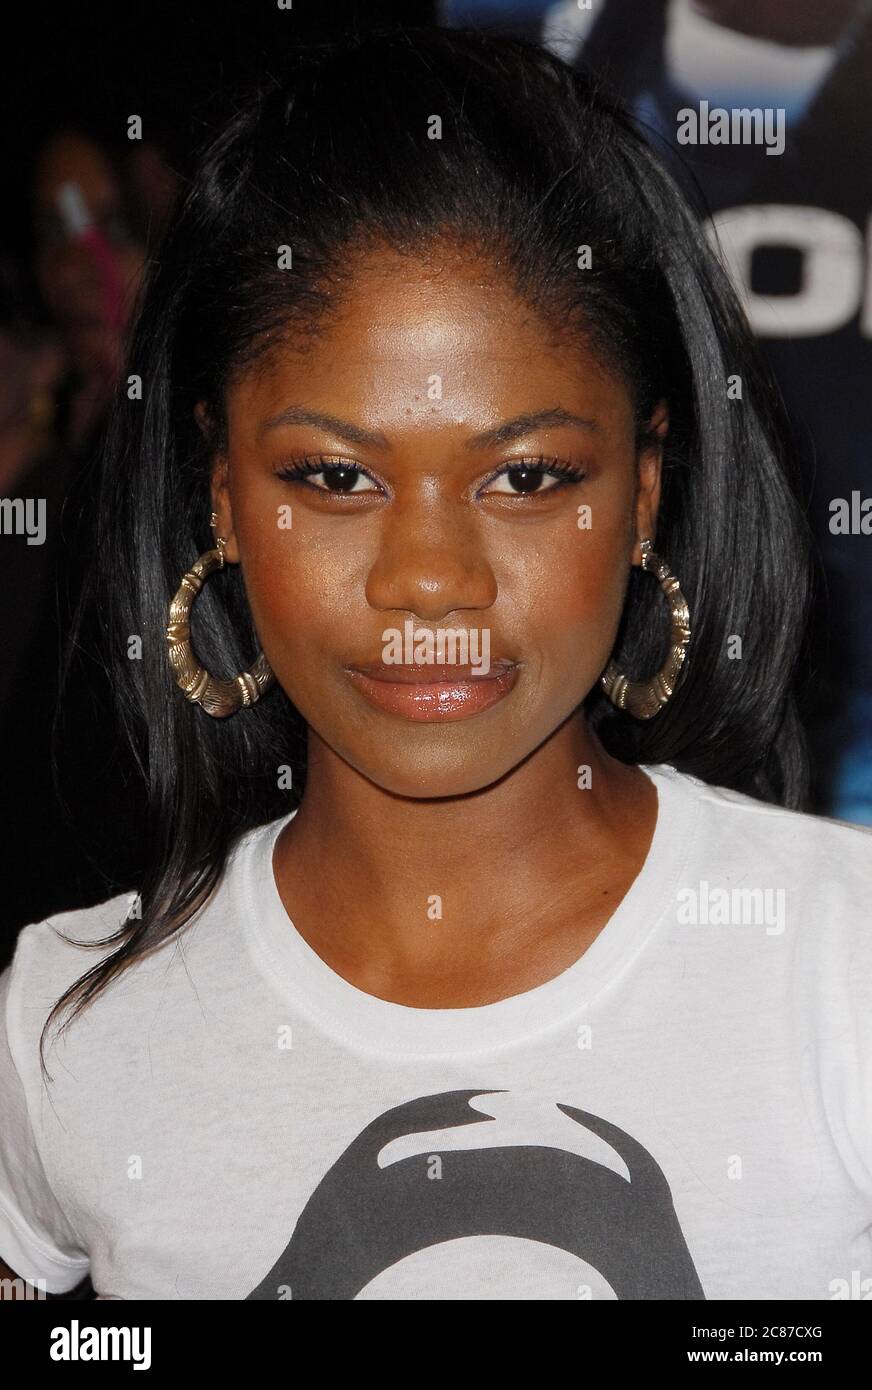 Vanessa Lee Chester at the Premiere of 'Somebody Help Me' held at the Grauman's Chinese Theater in Hollywood, CA. The event took place on Thursday, October25, 2007. Photo by: SBM / PictureLux- File Reference # 34006-8969SBMPLX Stock Photo